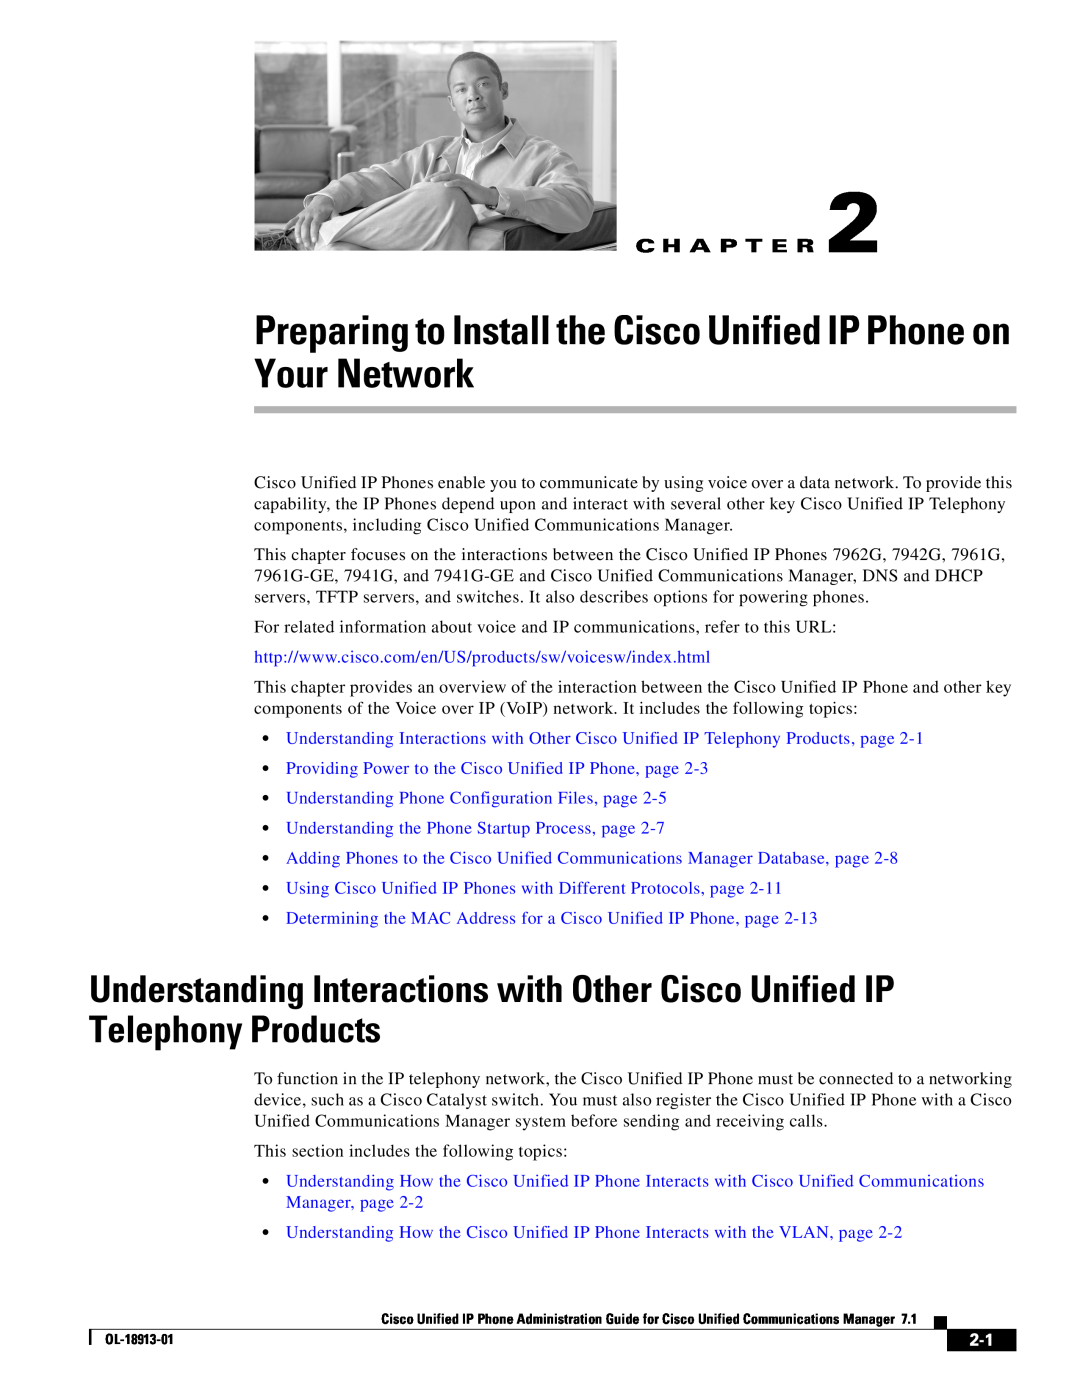 Cisco Systems 71 manual Providing Power to the Cisco Unified IP Phone, page, Understanding Phone Configuration Files, page 